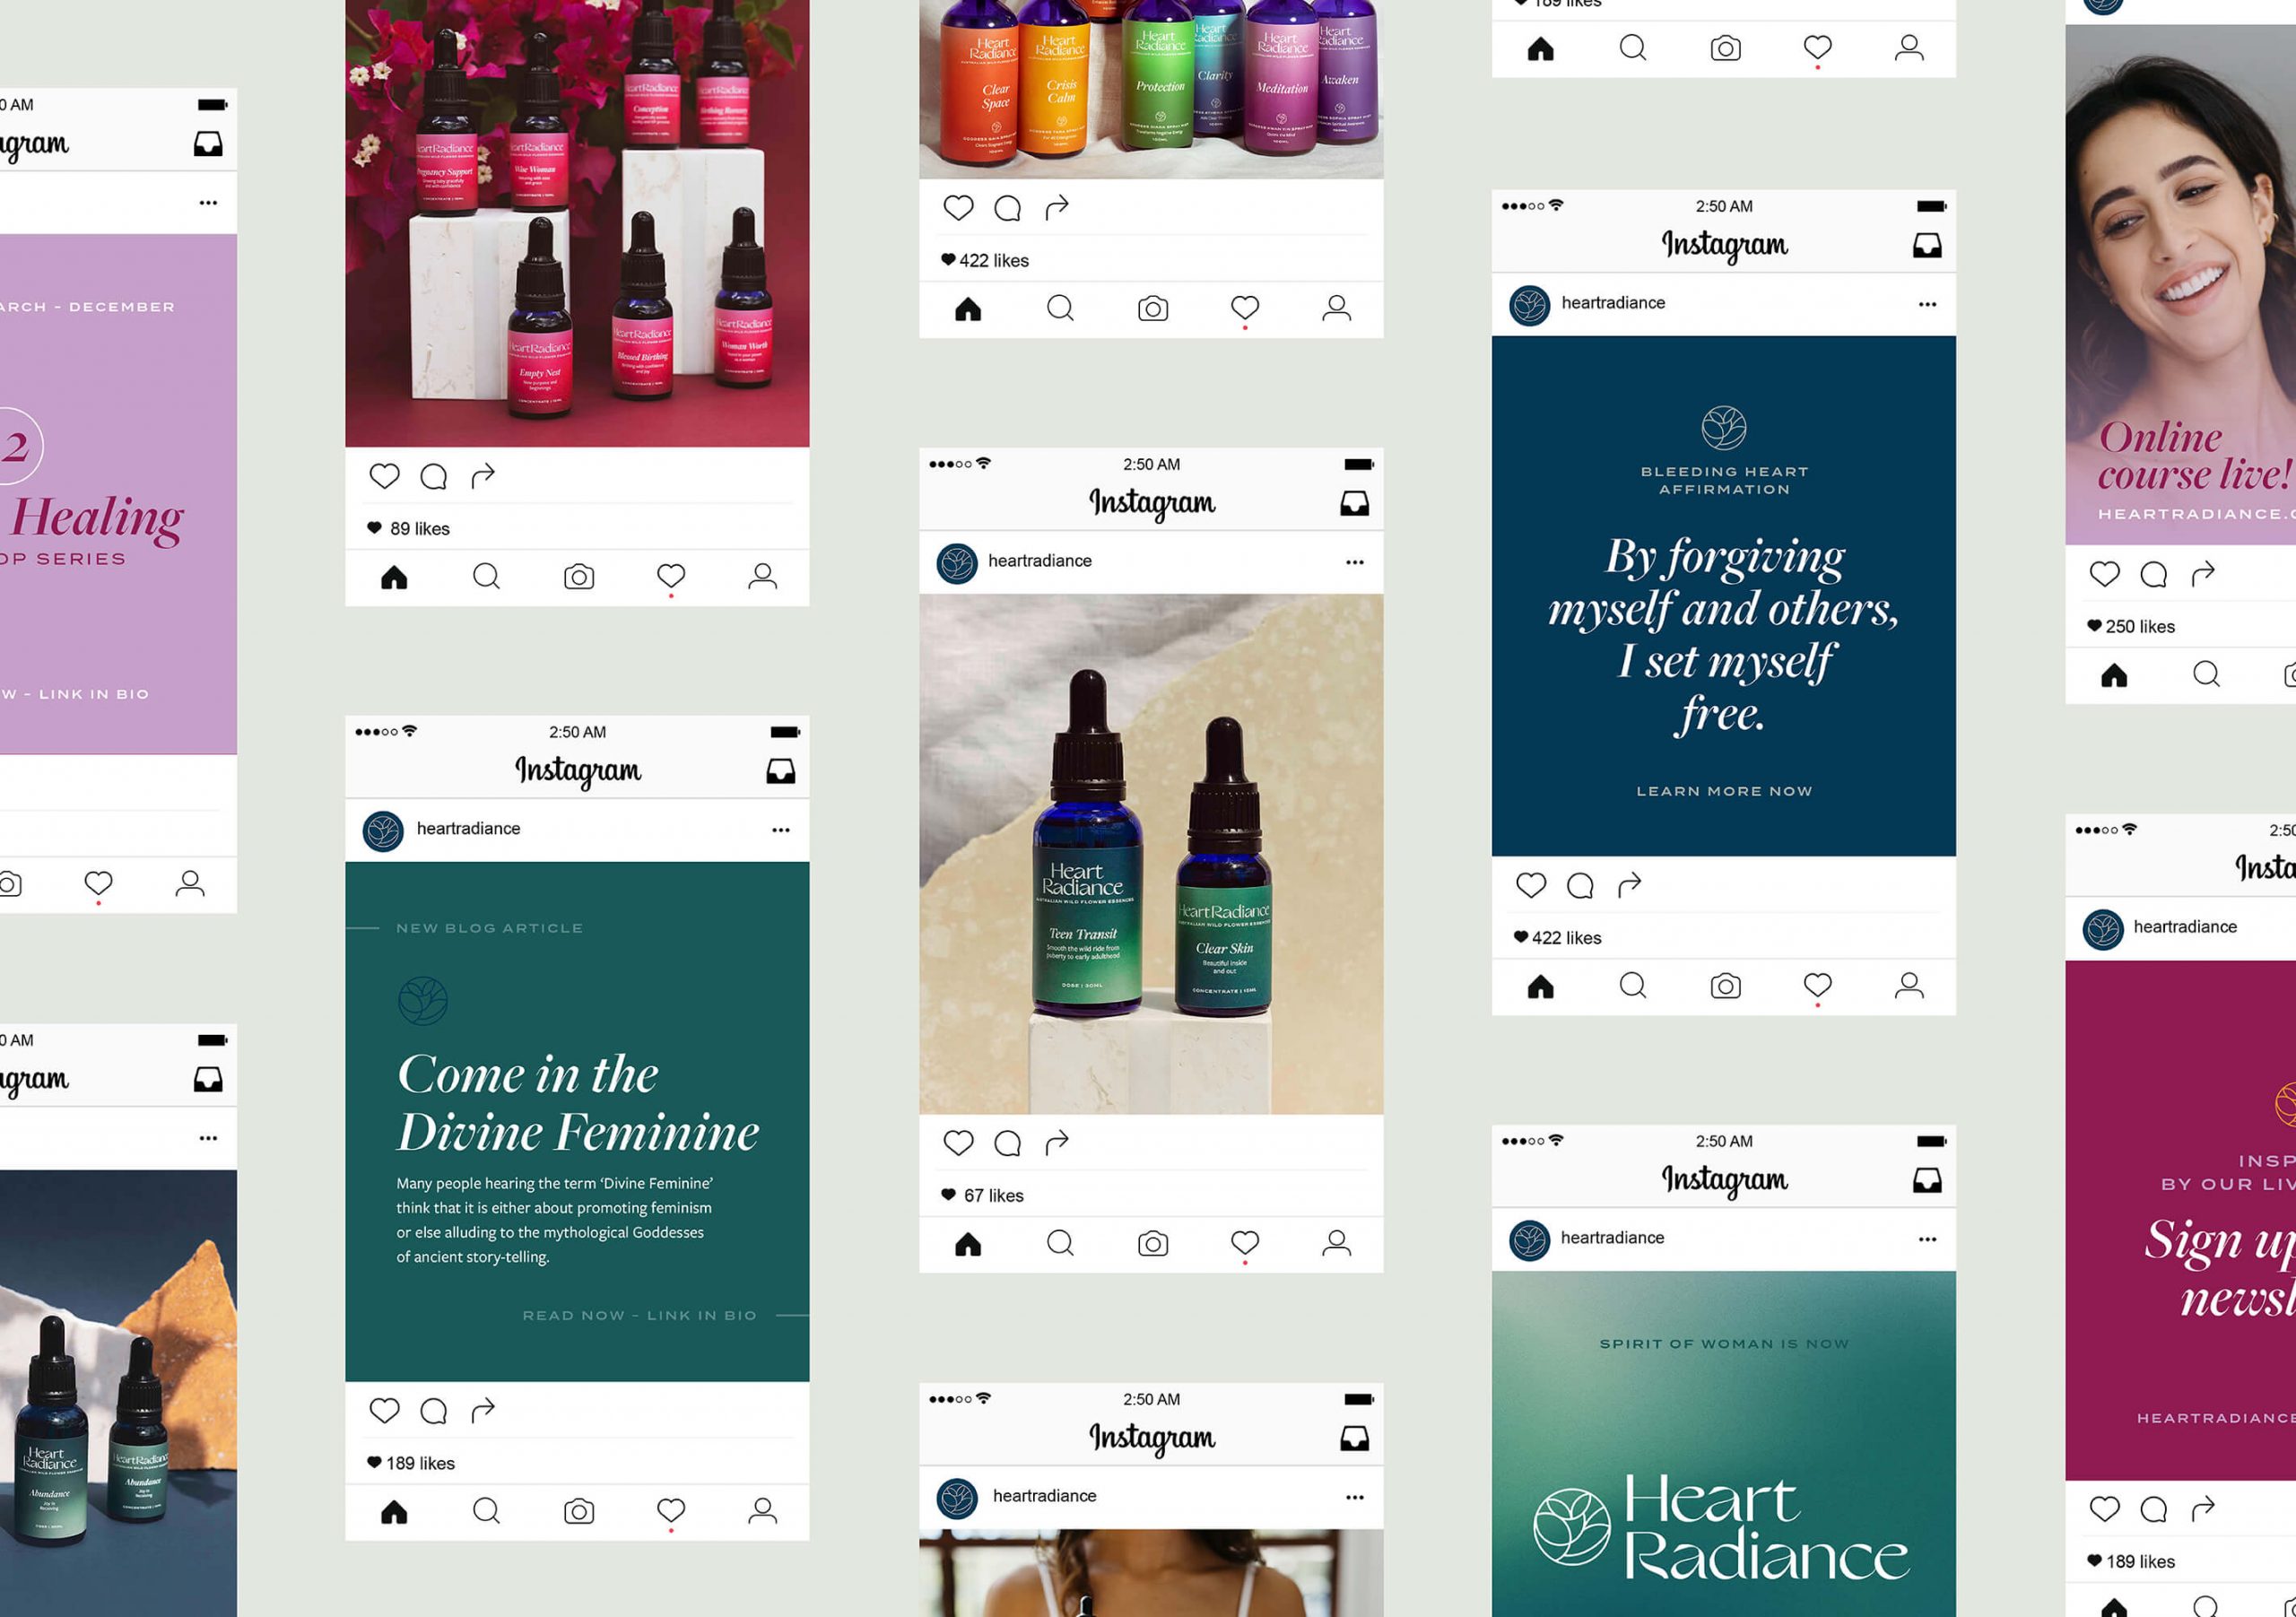 Brand identity case study image of HeartRadiance’s social media templates. The imagery shows the jewel toned colour palette, elegant typography and beautiful product photography.